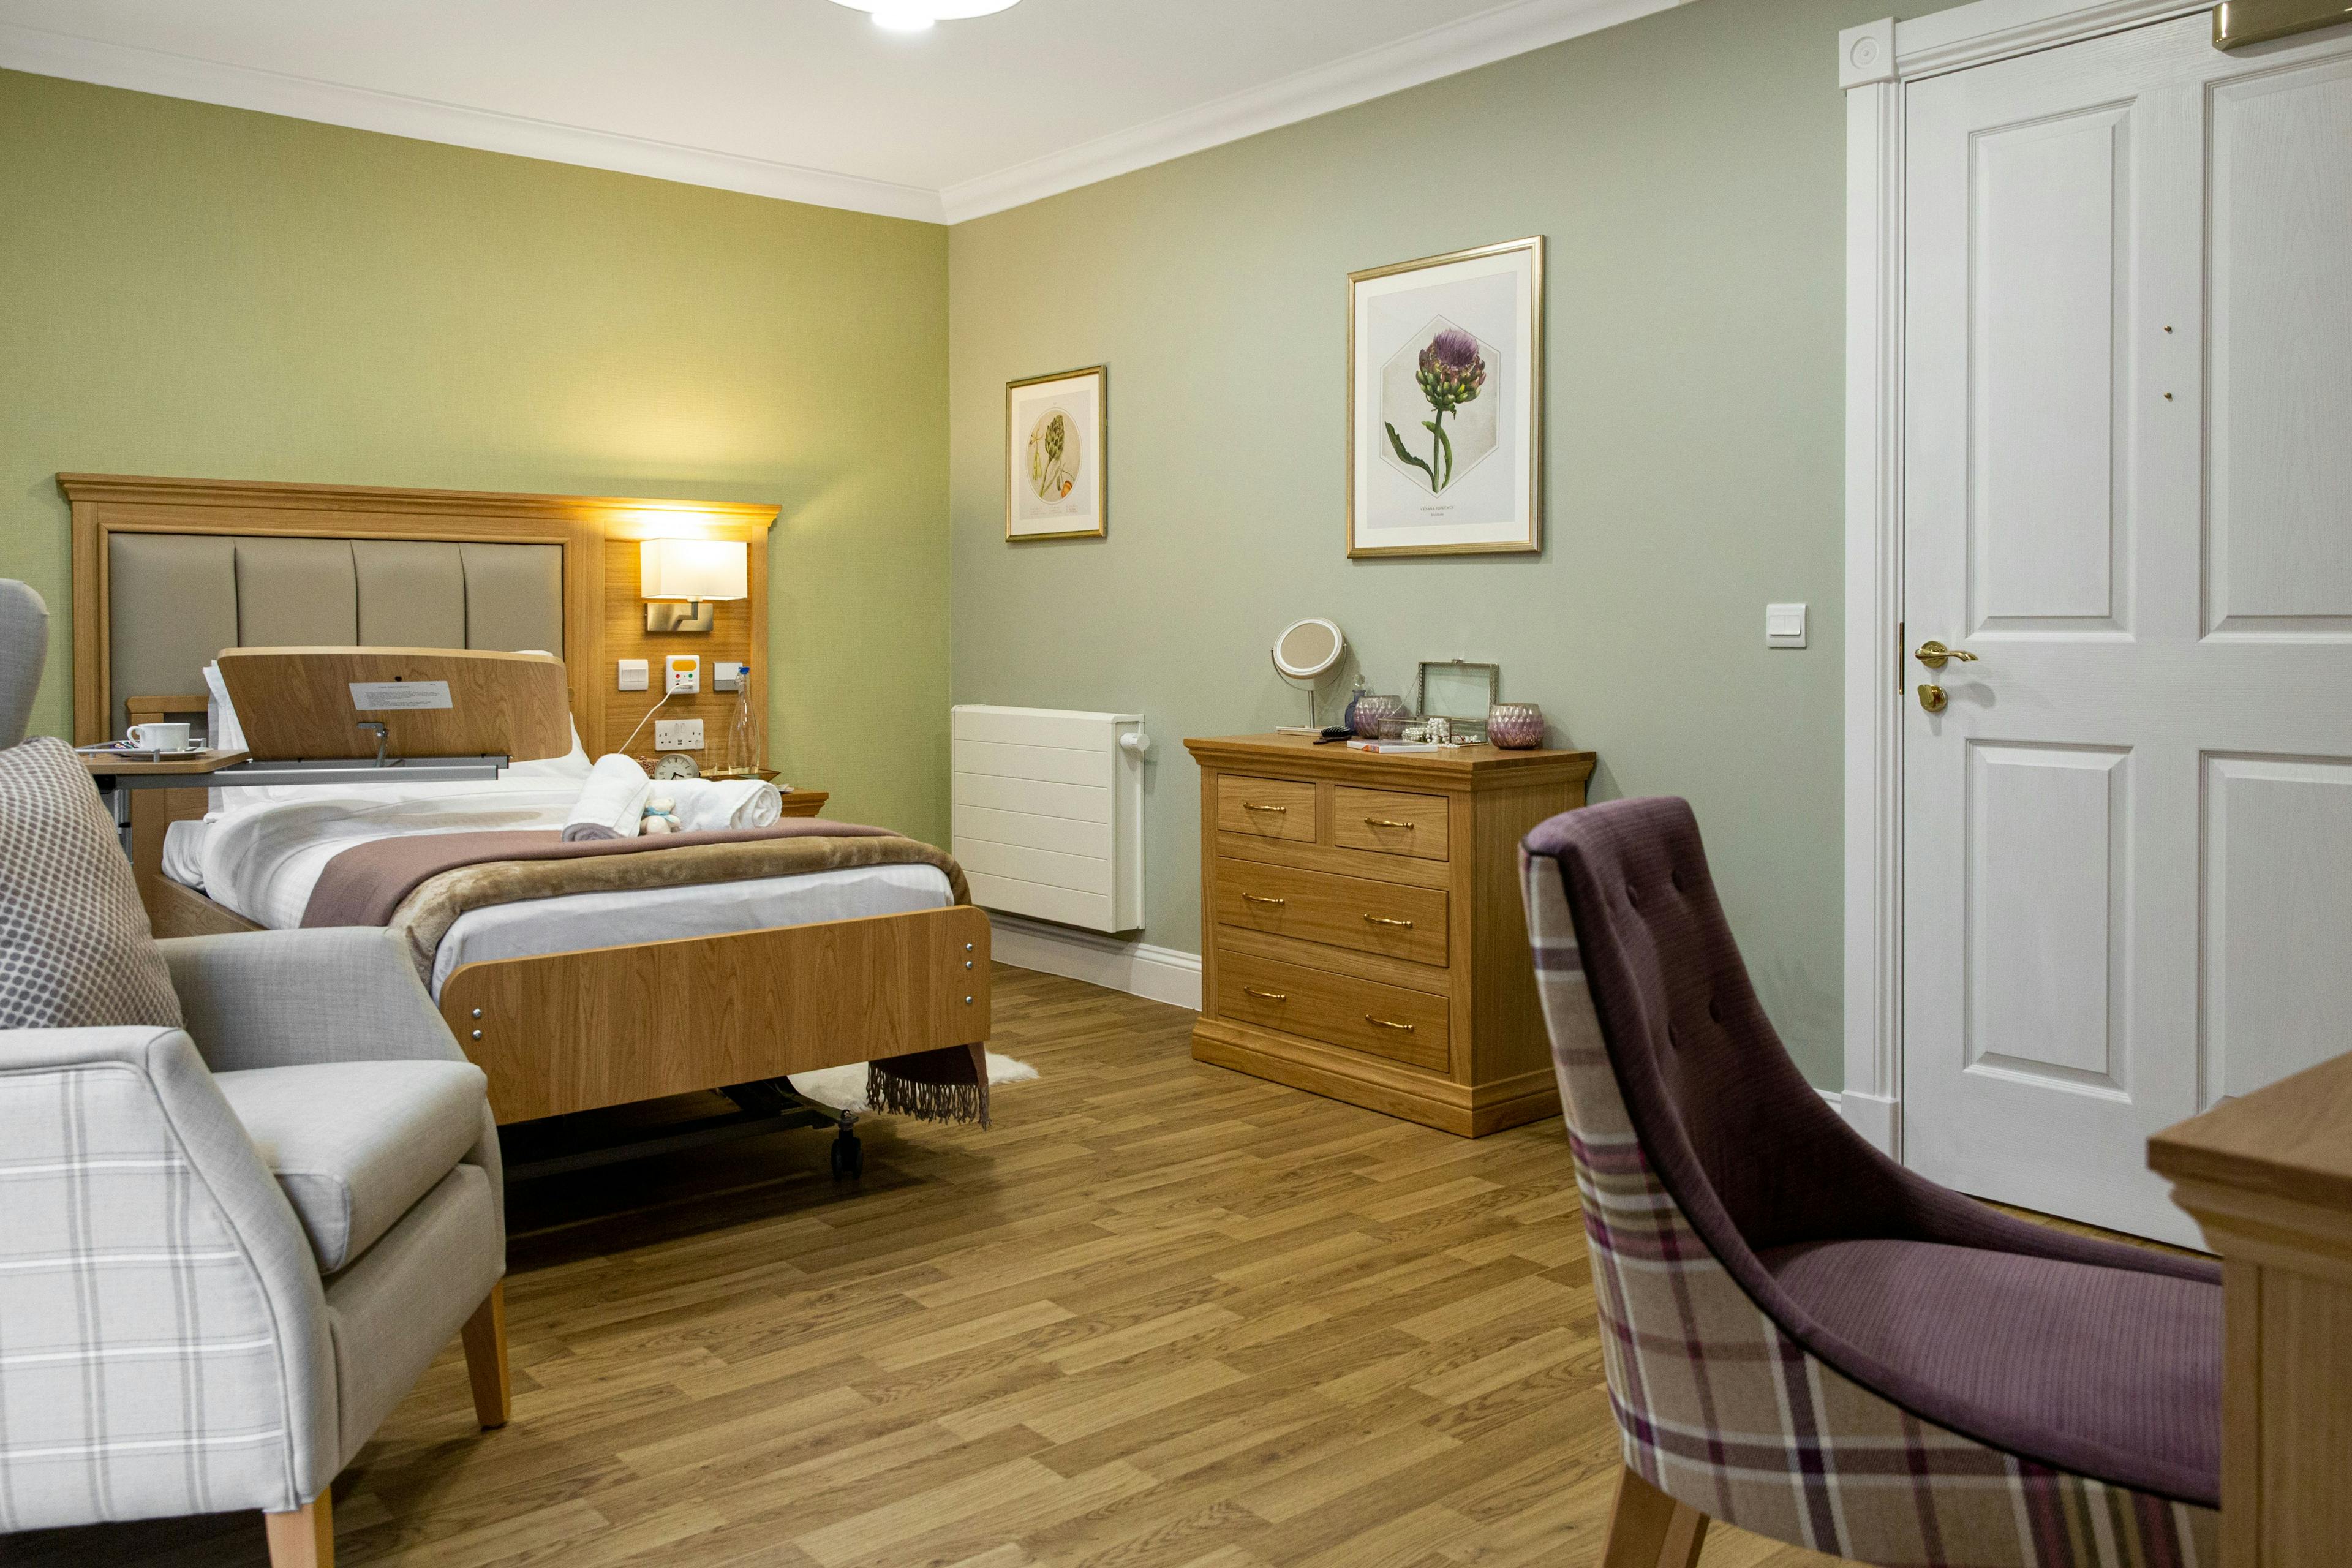 Bedroom of Candlewood House care home in Harrow, Greater London